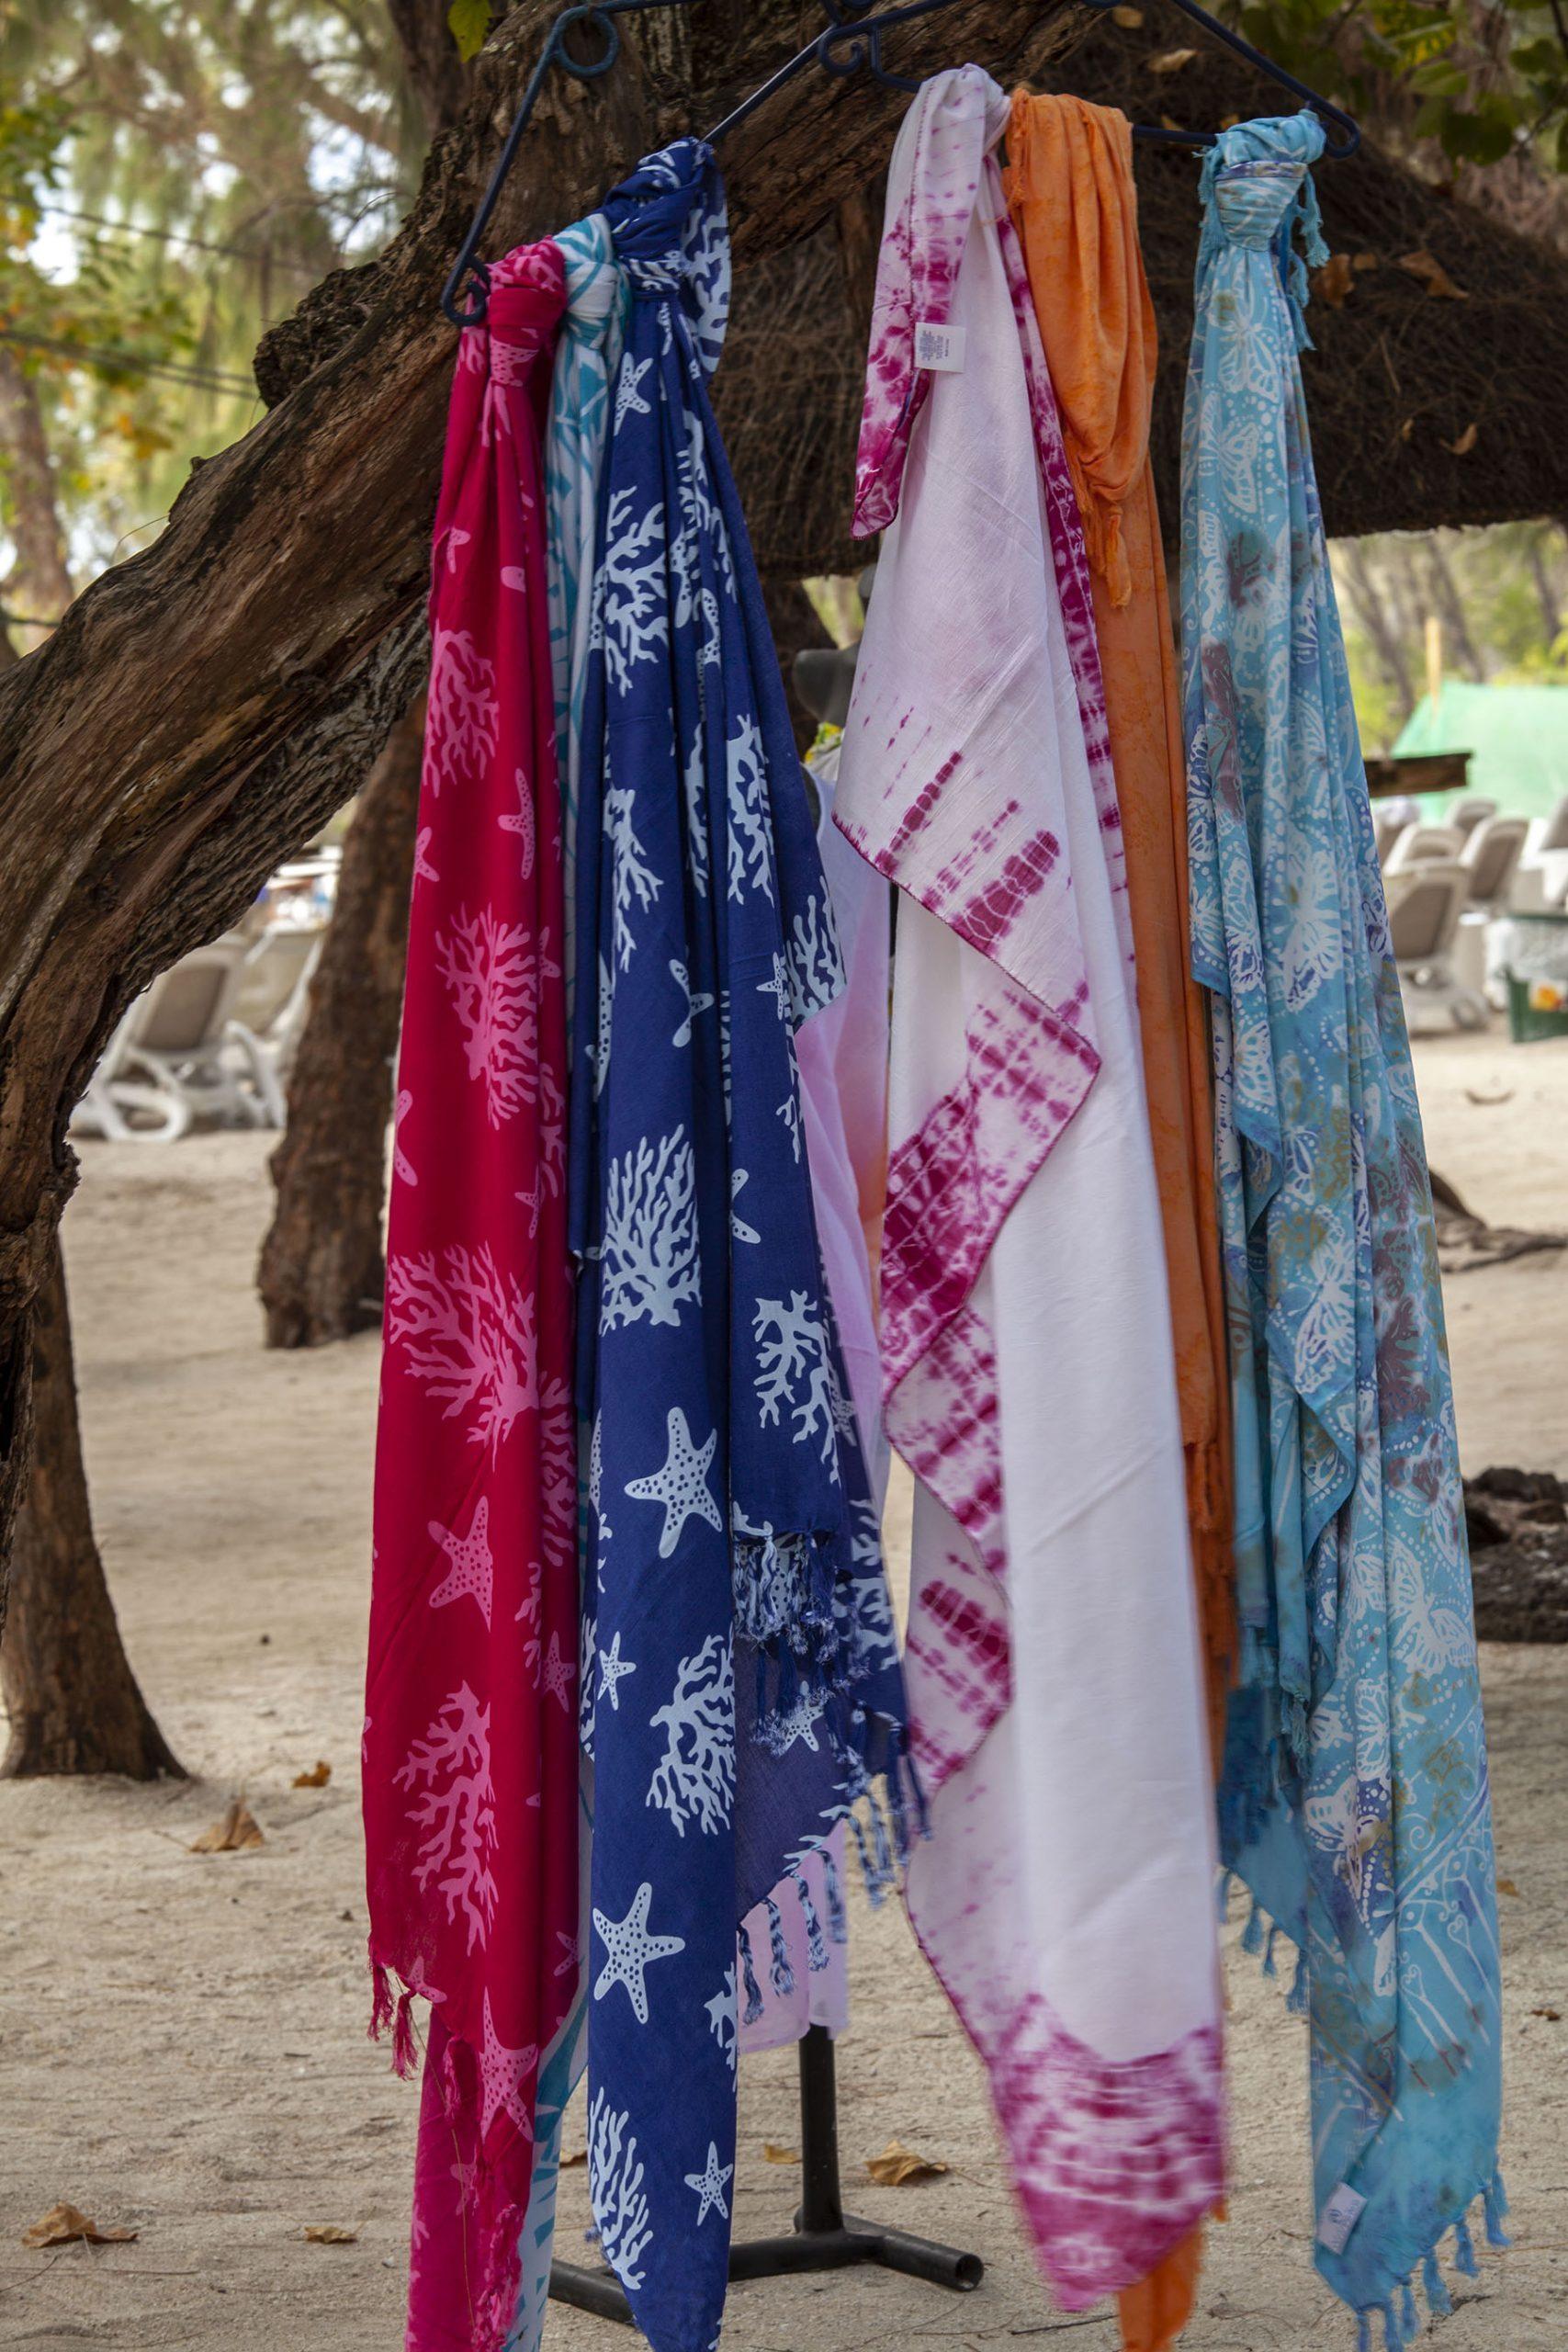 sarongs hanging from tree branch Ile des Cerfs Mauritius